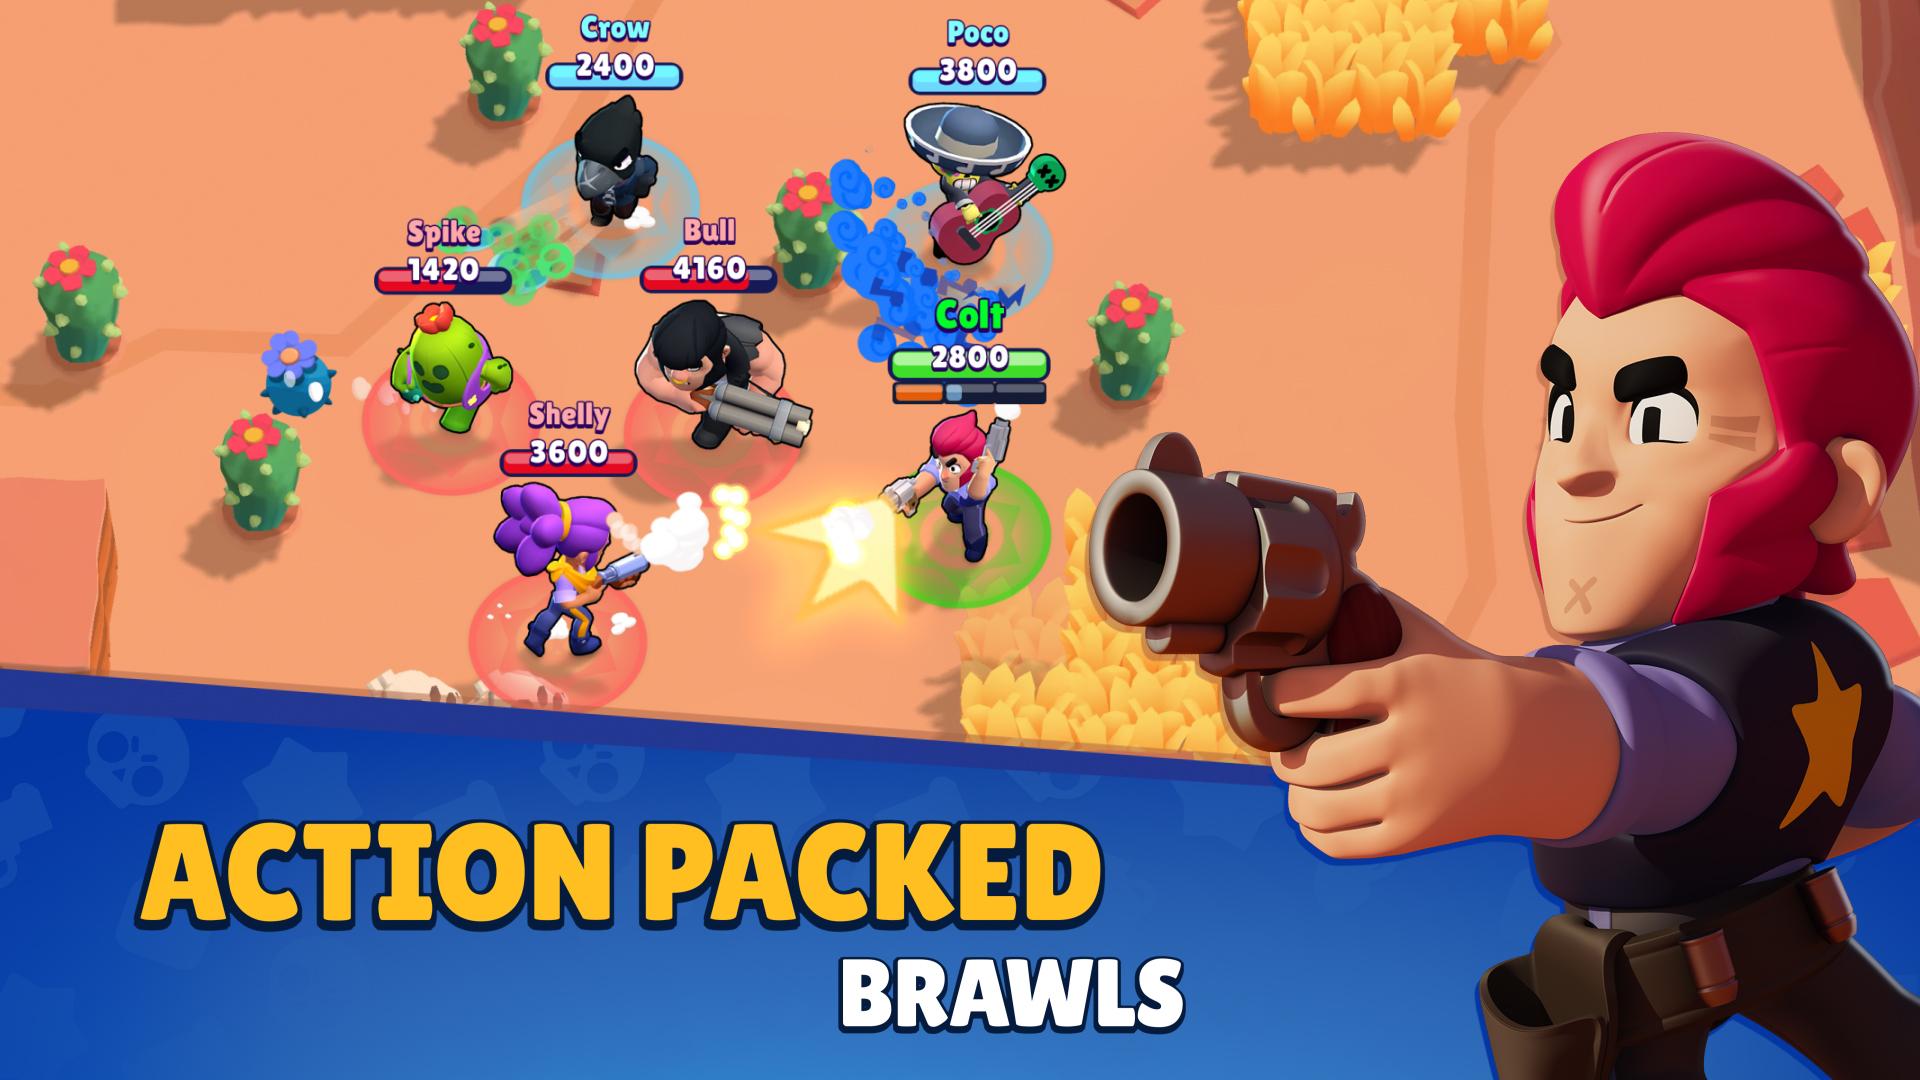 Brawl Stars How To Get The Most Bang For Your Gem Buck Premium Currency Guide Gameranx - how to spend your tickets brawl stars